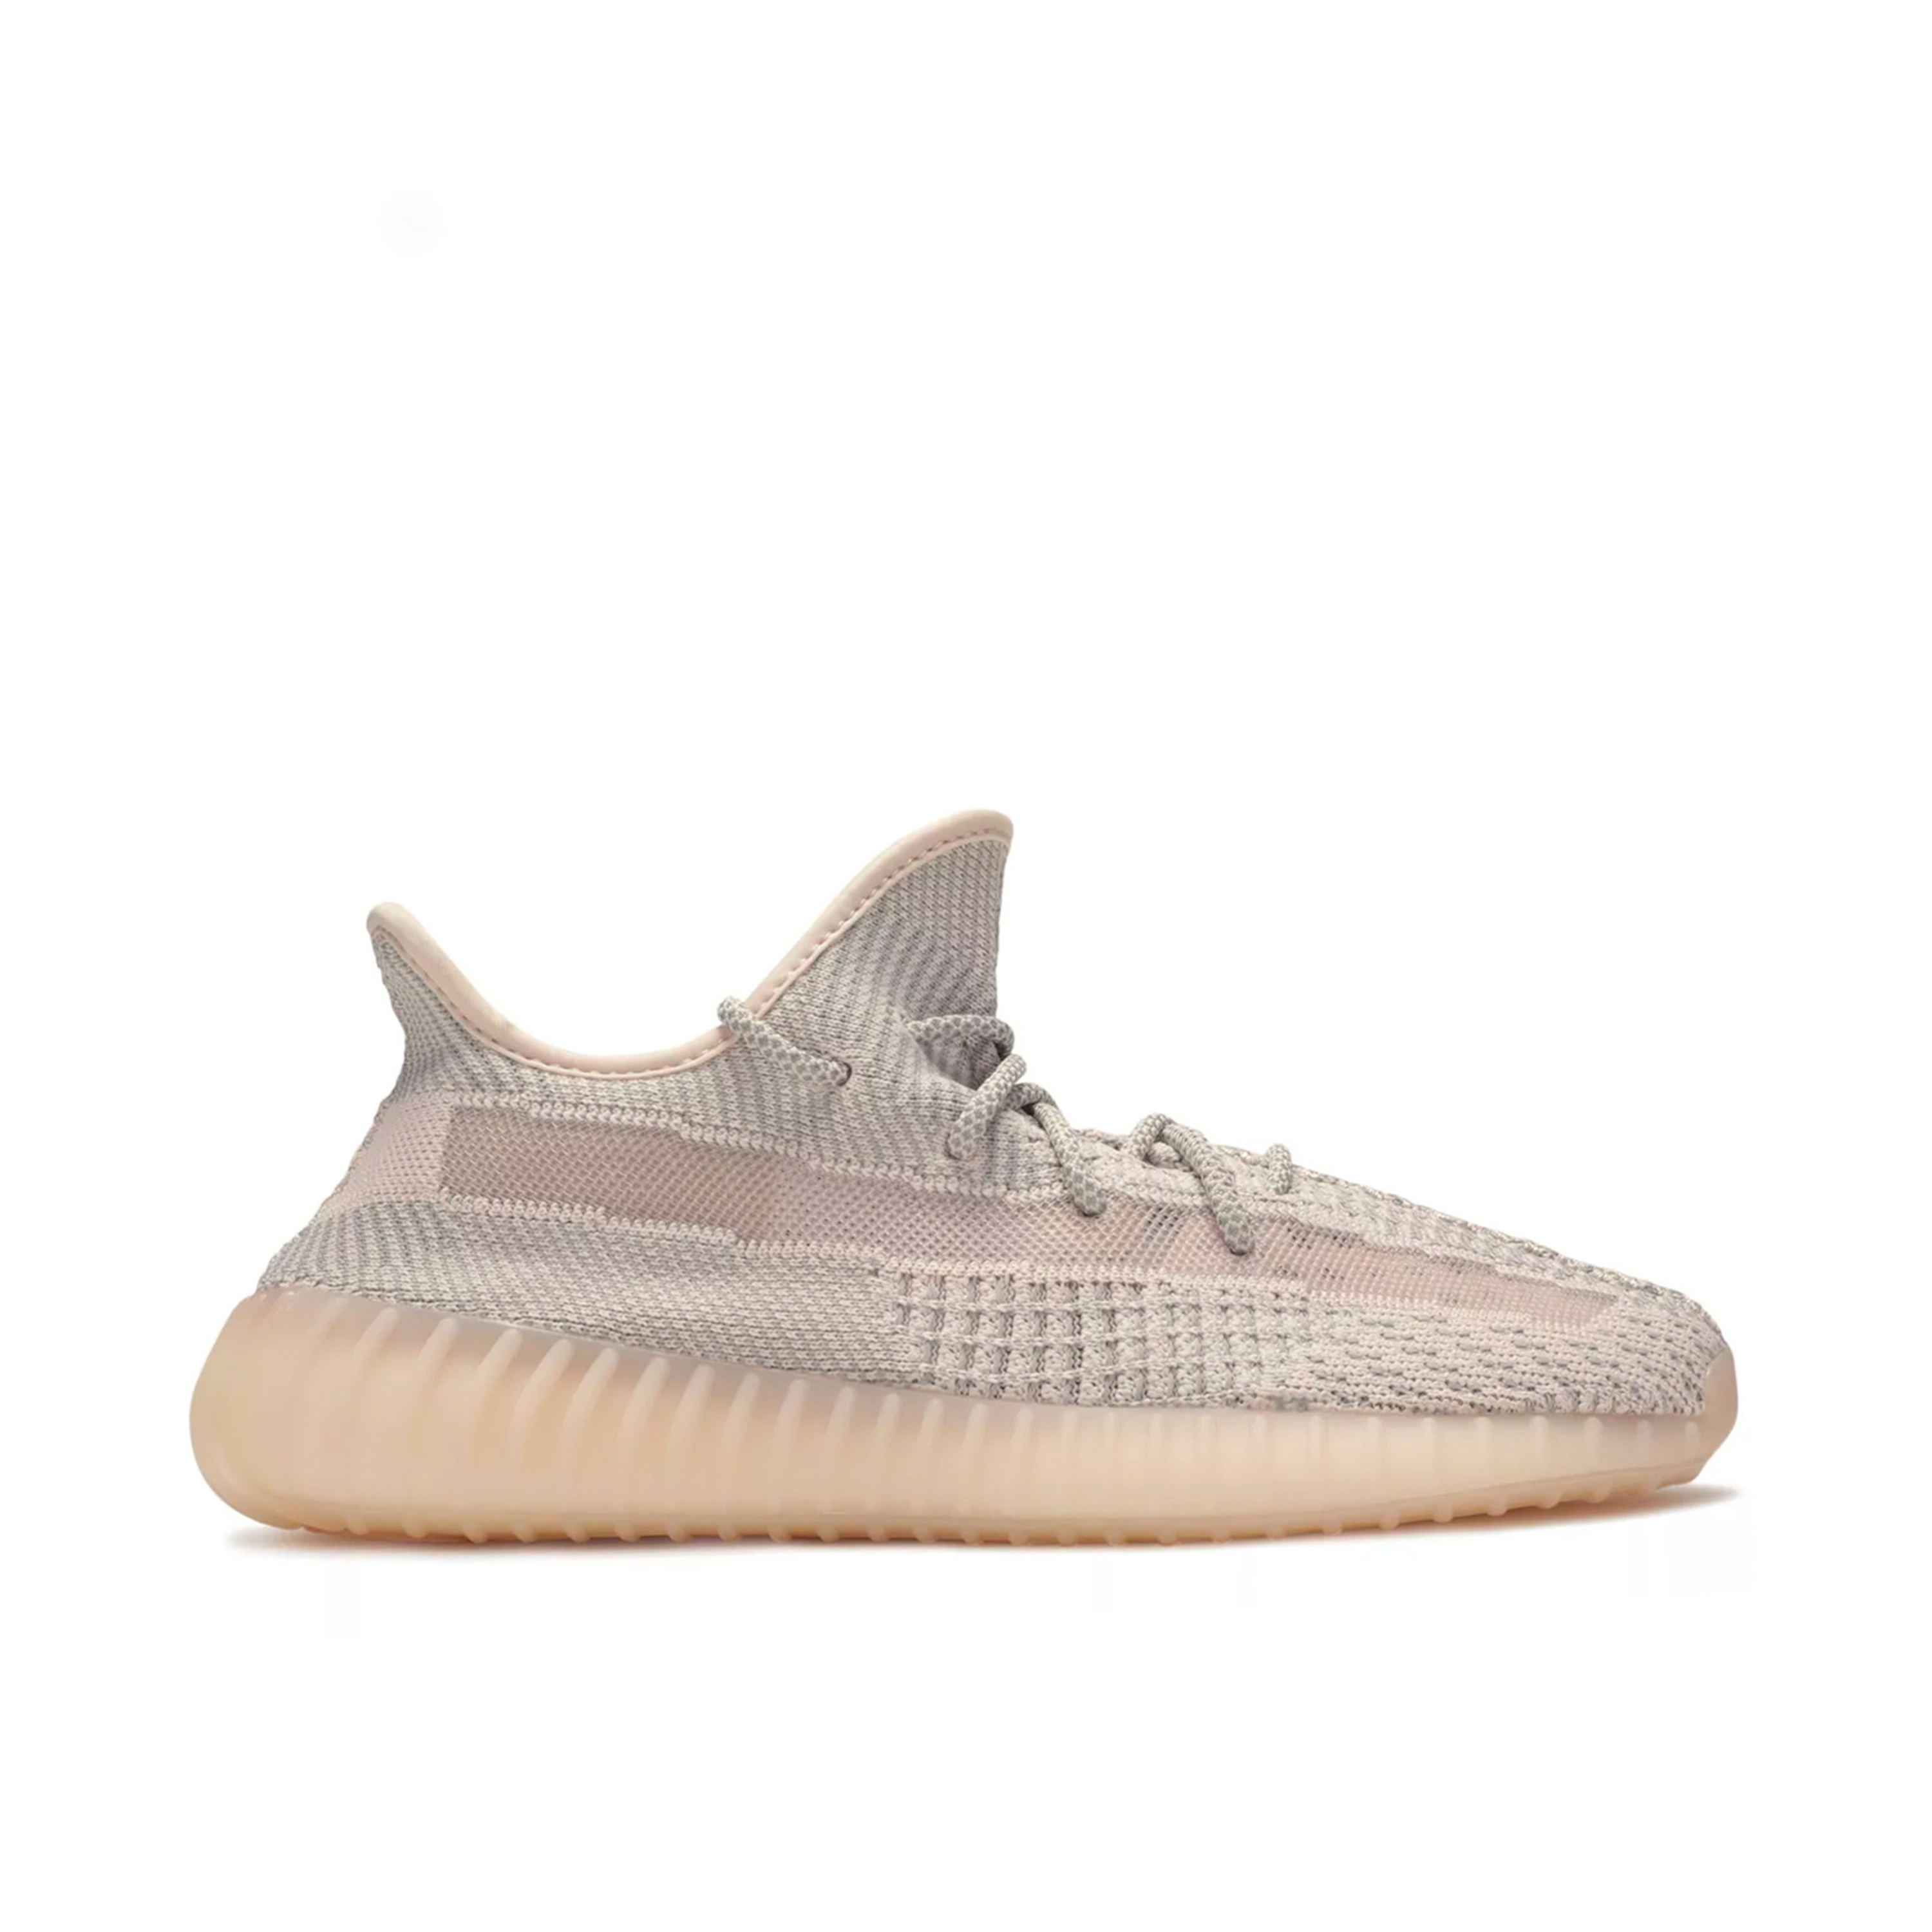 yeezy boost 350 v2 synth 26.0